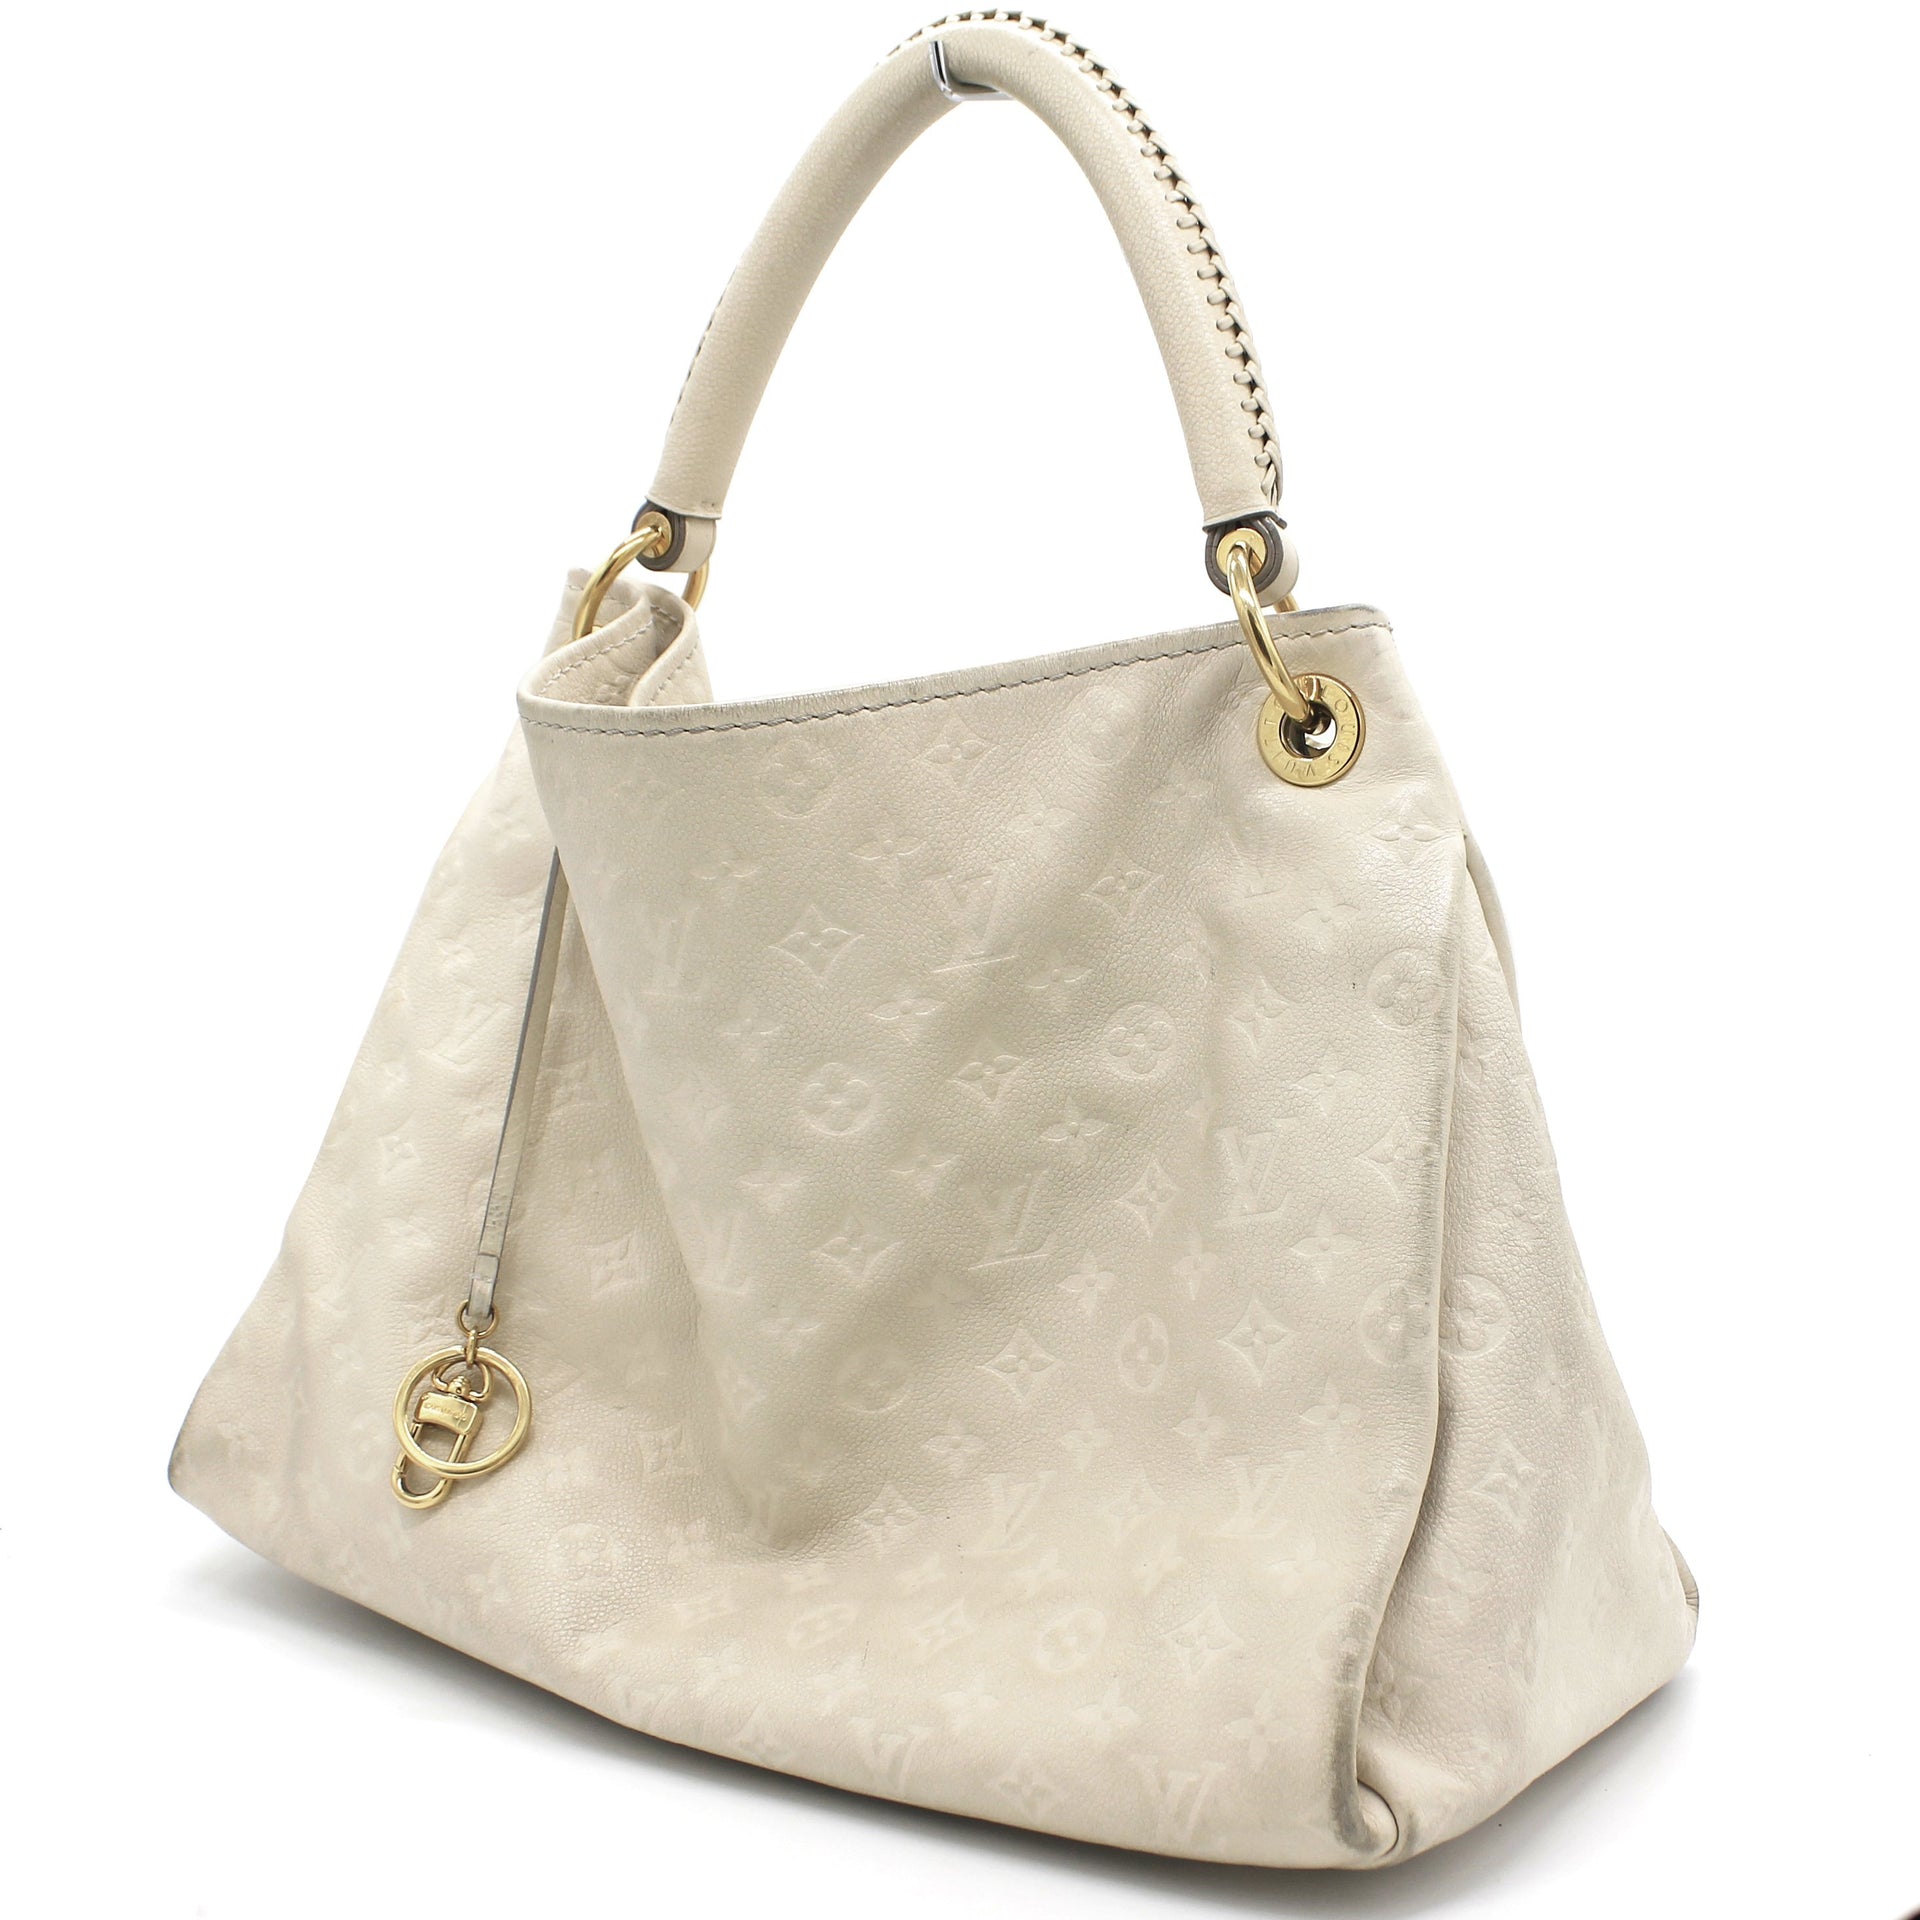 Louis Vuitton - Authenticated Artsy Handbag - Leather White for Women, Very Good Condition